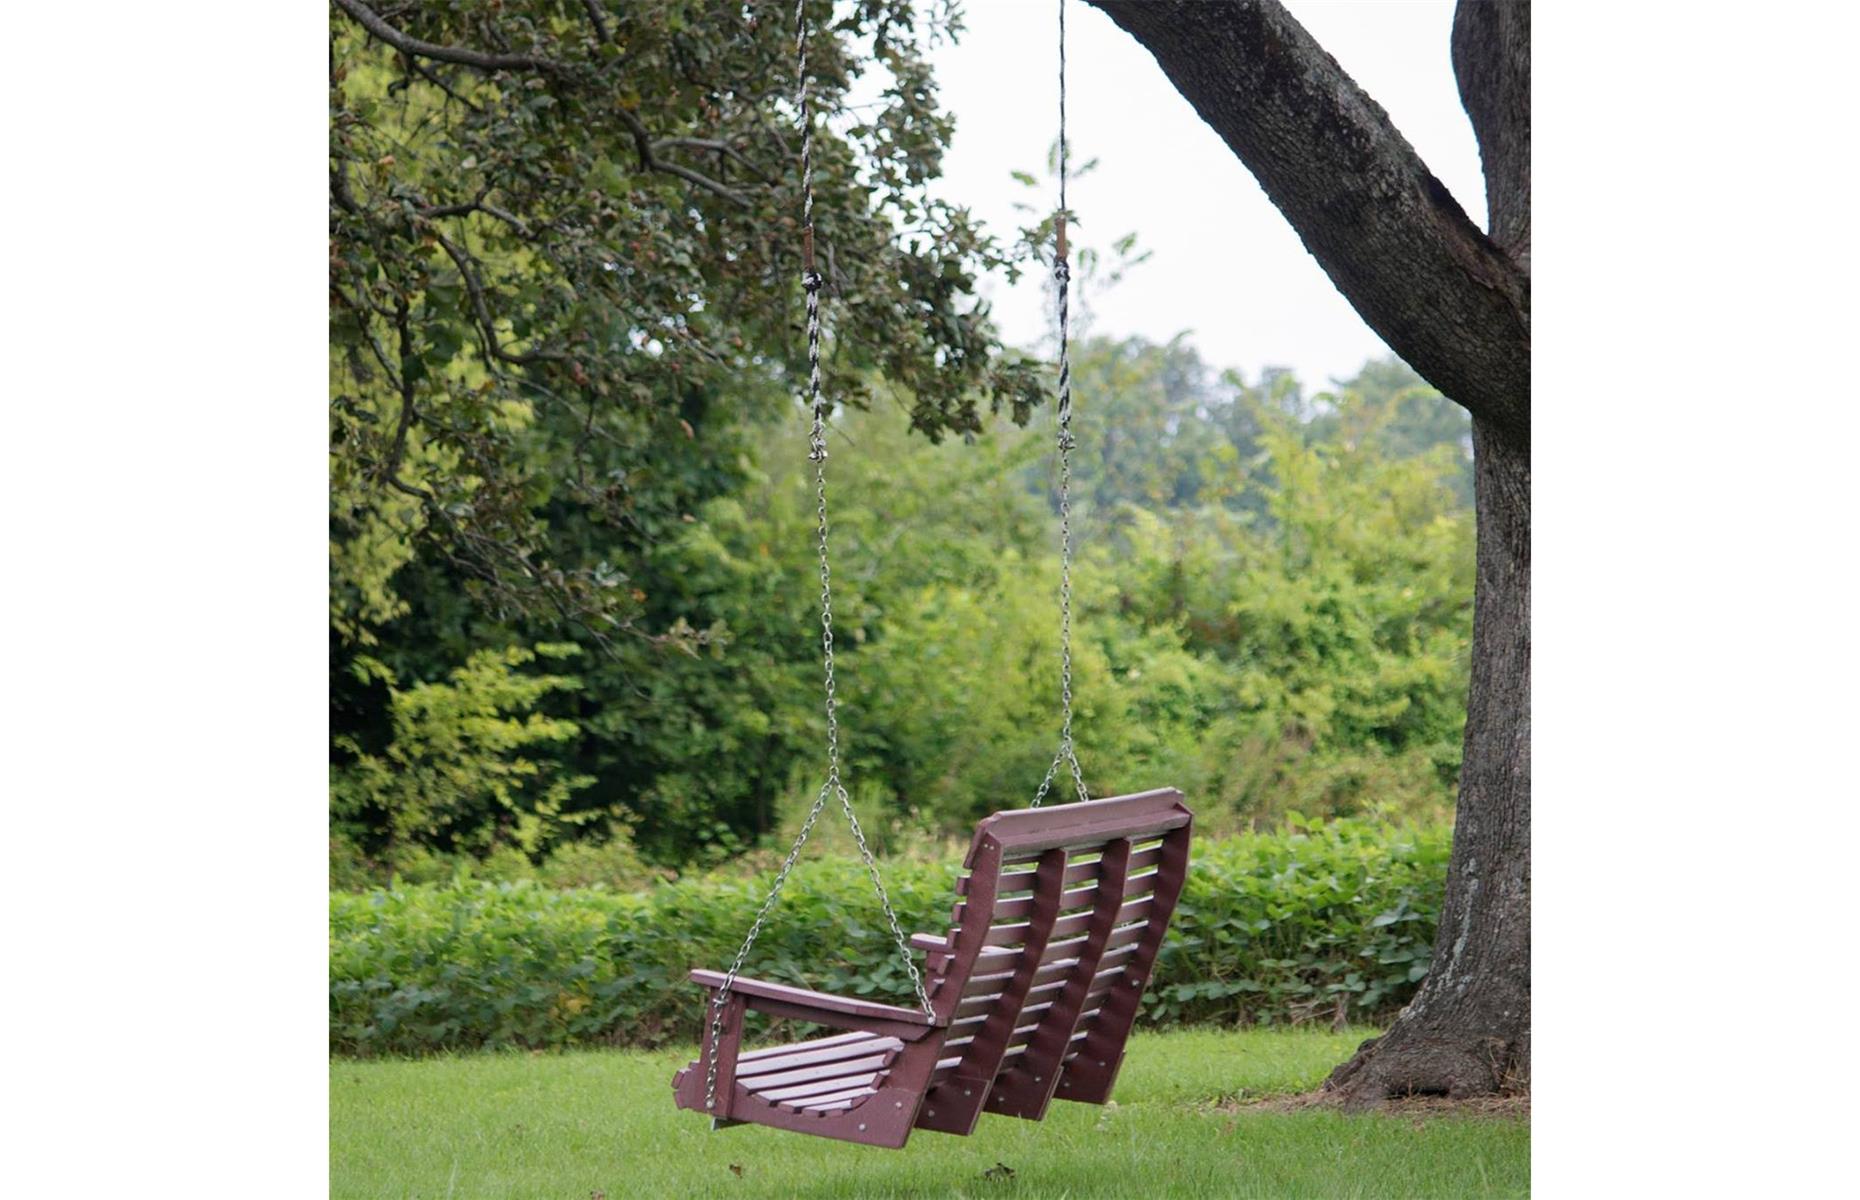 <p>Swing seats and skittish deer come together to create <a href="https://www.whittingtonwoodscampground.com/facilities.php">the perfect woodland escape in southern Illinois</a>. Pass your time on site wandering the forest, keeping an eye out for wildlife flitting between the trees, before relaxing at an electric hook-up site. The site is also close to Benton, known for its antique shopping, and wineries including Pheasant Hollow and Walker's Bluff too (both currently open). Keep an eye <a href="https://www.whittingtonwoodscampground.com/index.php">on the website</a> for updates about available facilities (such as the bathhouse, which is currently closed).</p>